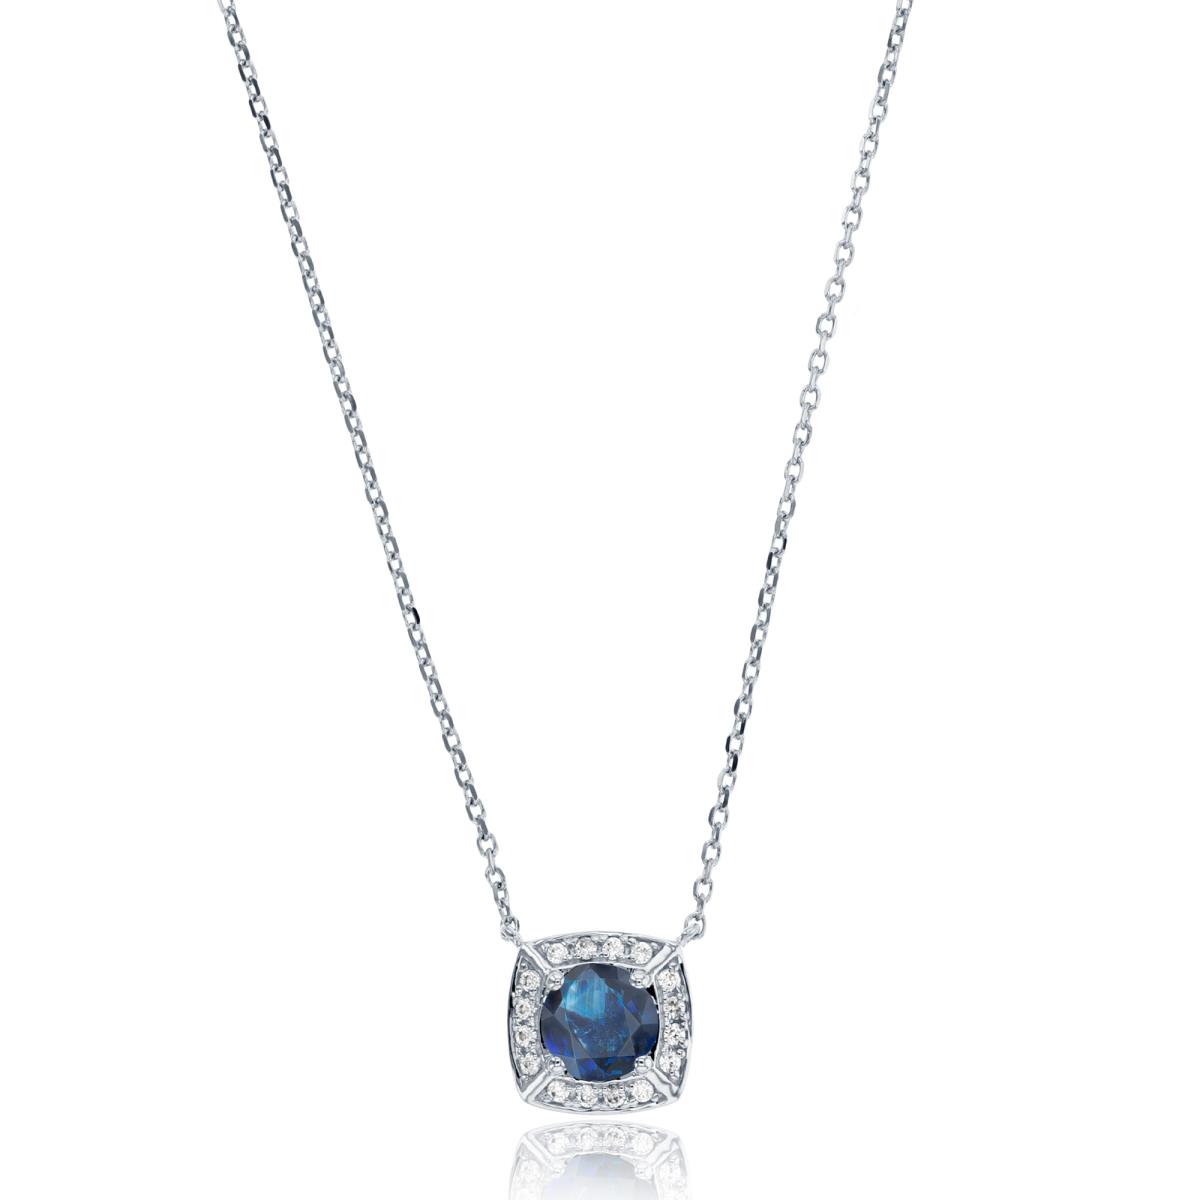 14K White Gold 0.08 CTTW Rd Diamond & 5mm Rd Sapphire Cushion 18" Necklace